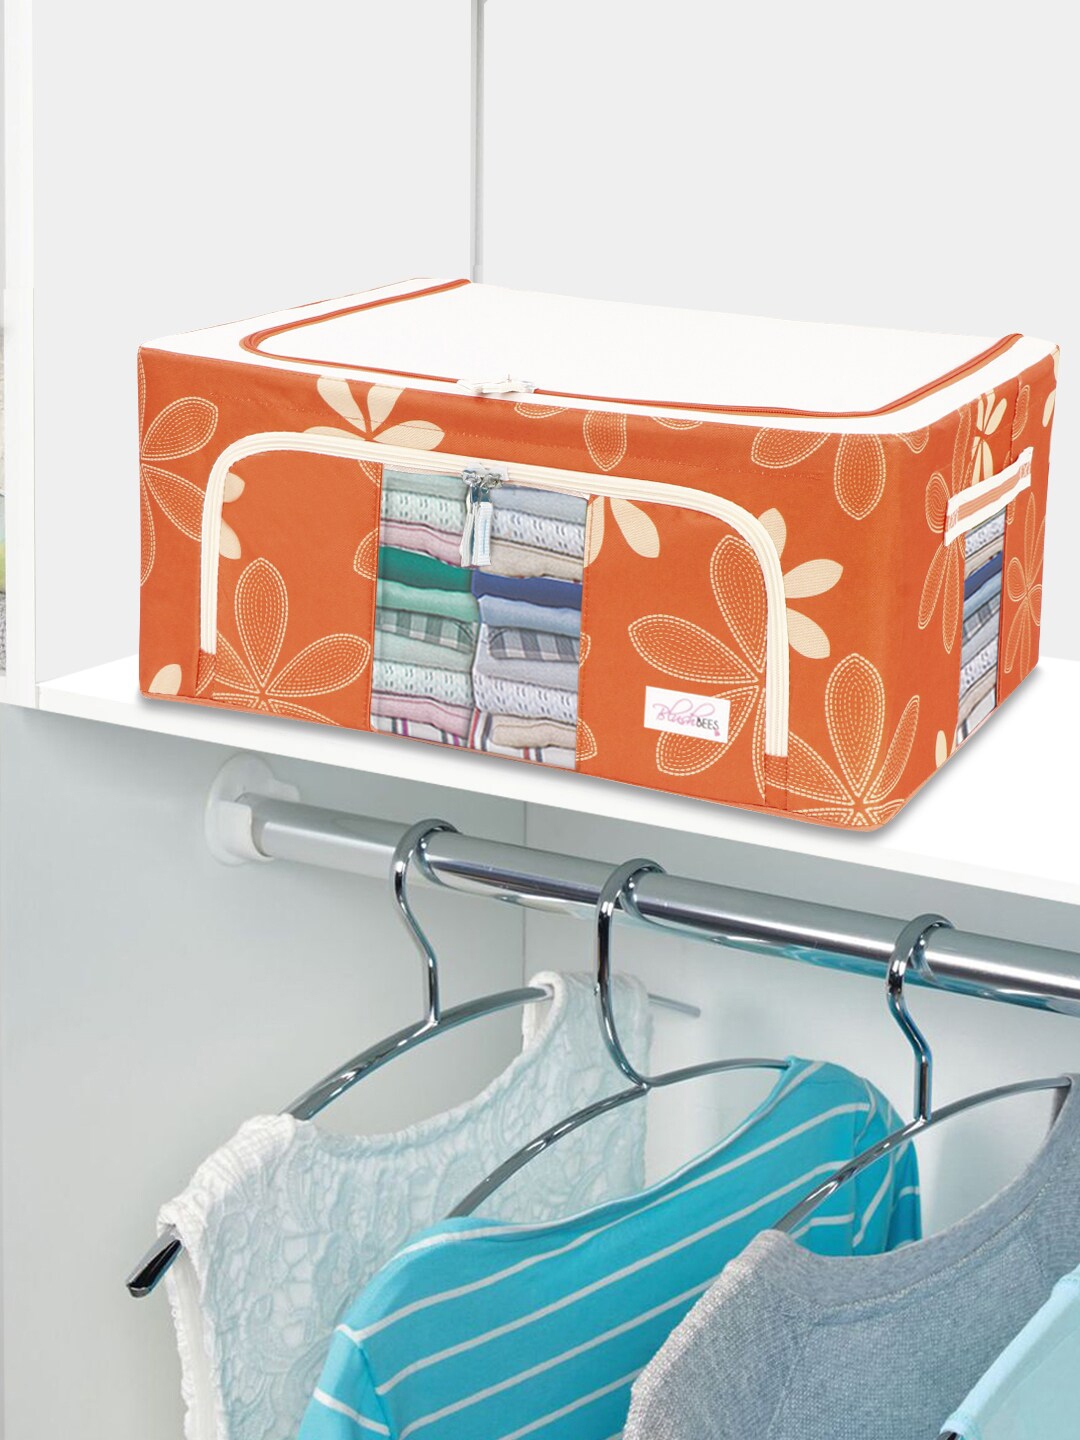 BlushBees Orange Printed Water Resistant Foldable Storage Box With Transparent Window